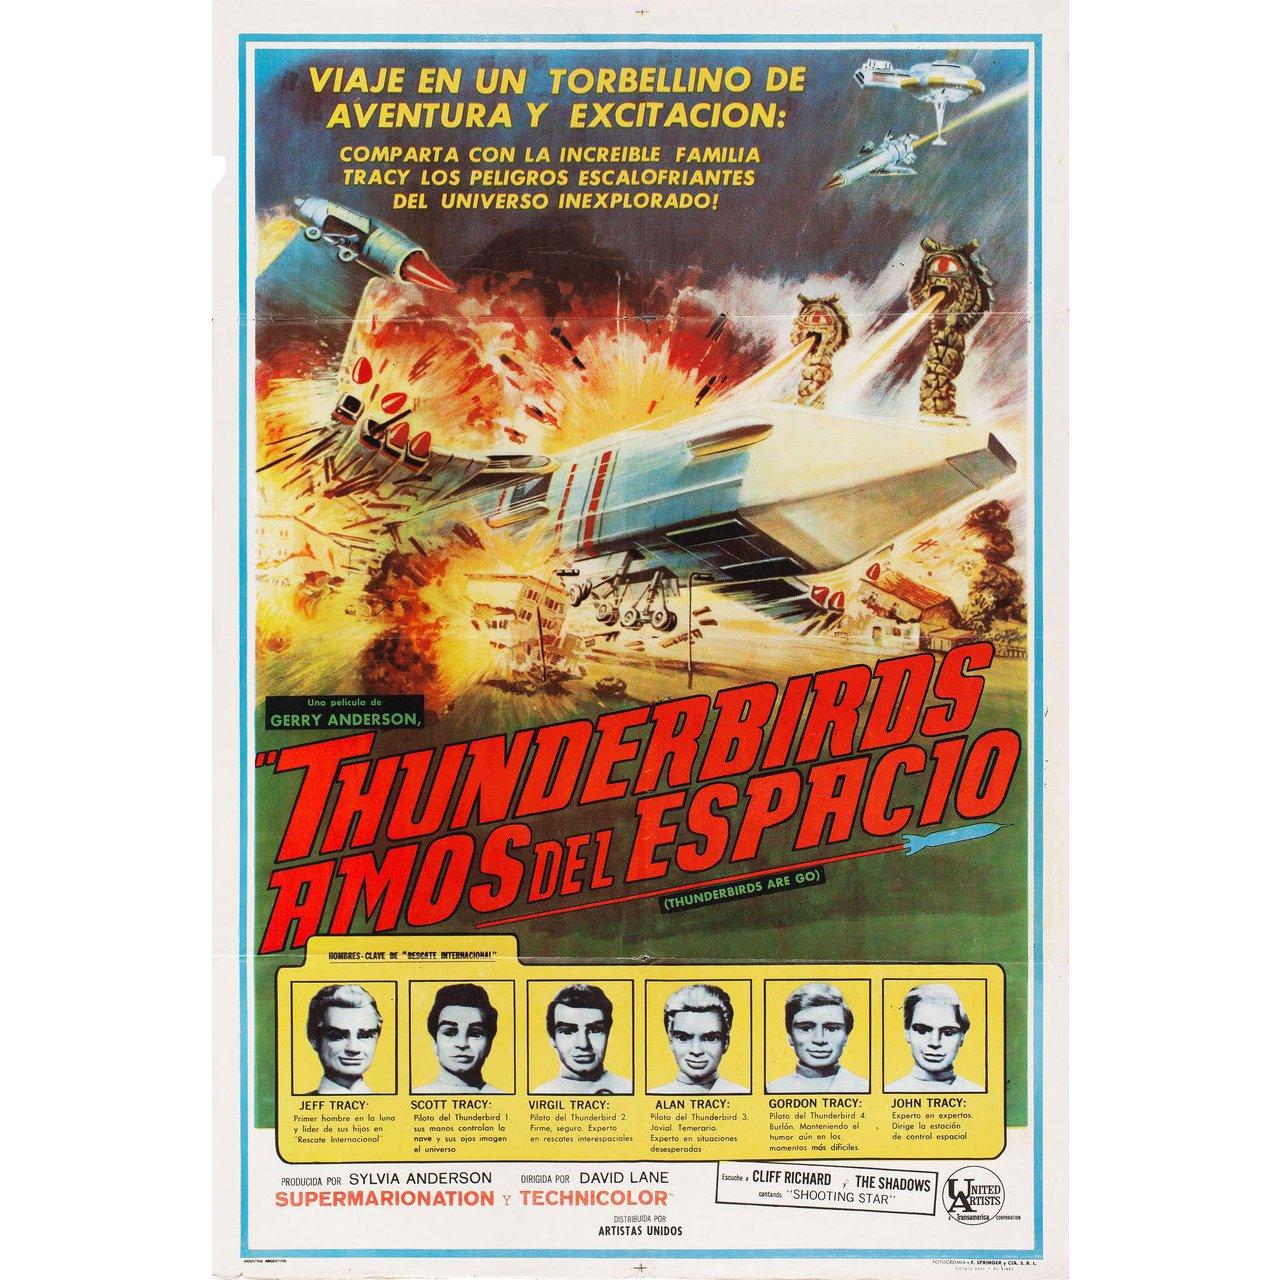 Original 1967 Argentine poster for the first Argentine theatrical release of the film Thunderbirds Are GO directed by David Lane with Peter Dyneley / Sylvia Anderson / Shane Rimmer / Jeremy Wilkin. Good-very good condition, folded with silver fish